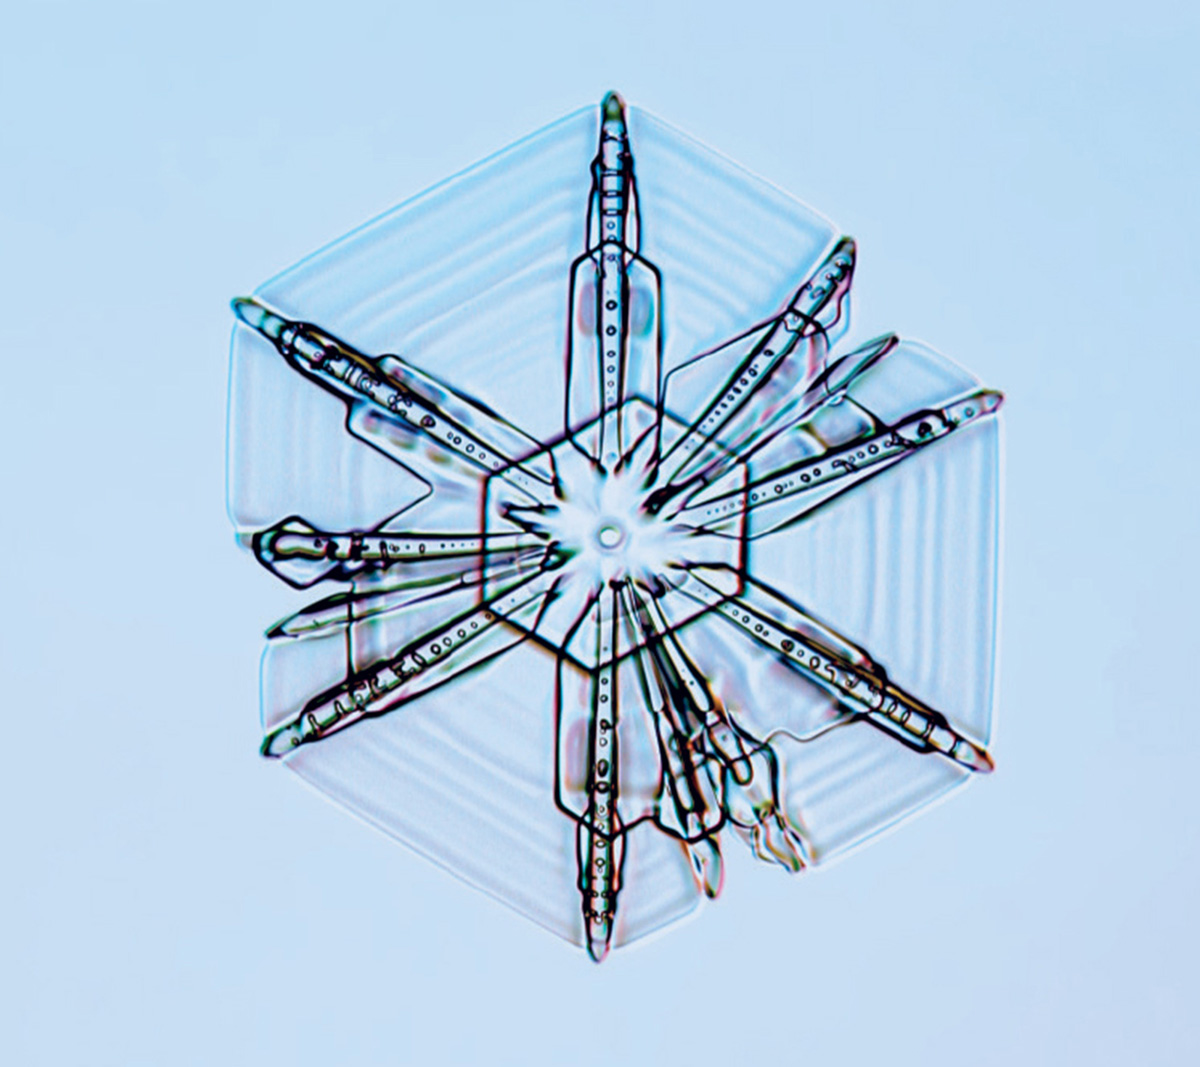 An image of a snowflake captured by Kenneth Libbrecht with a specially designed photomicroscope.